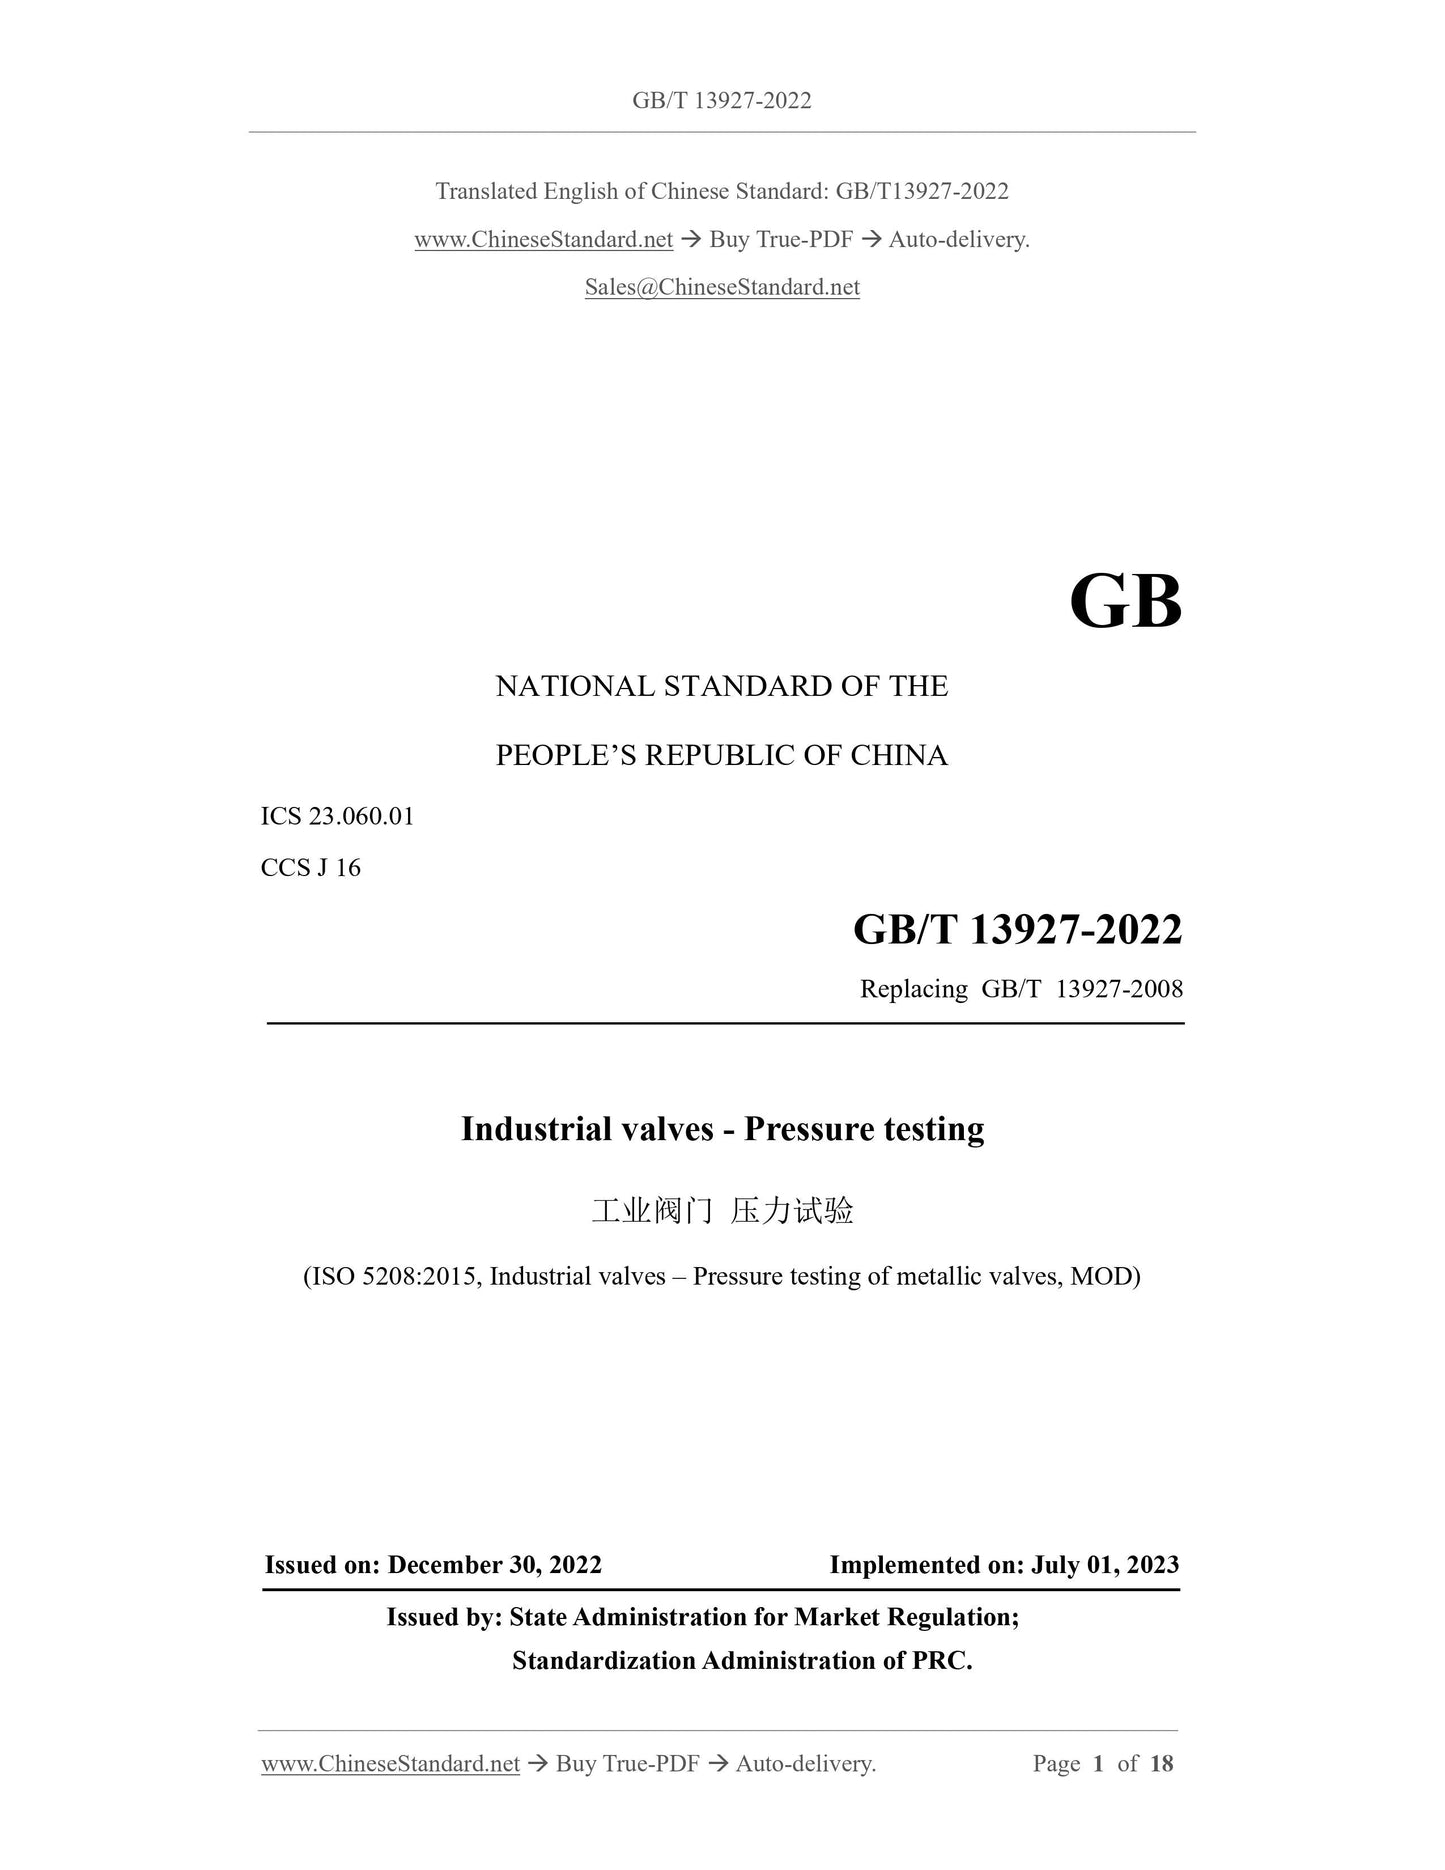 GB/T 13927-2022 Page 1